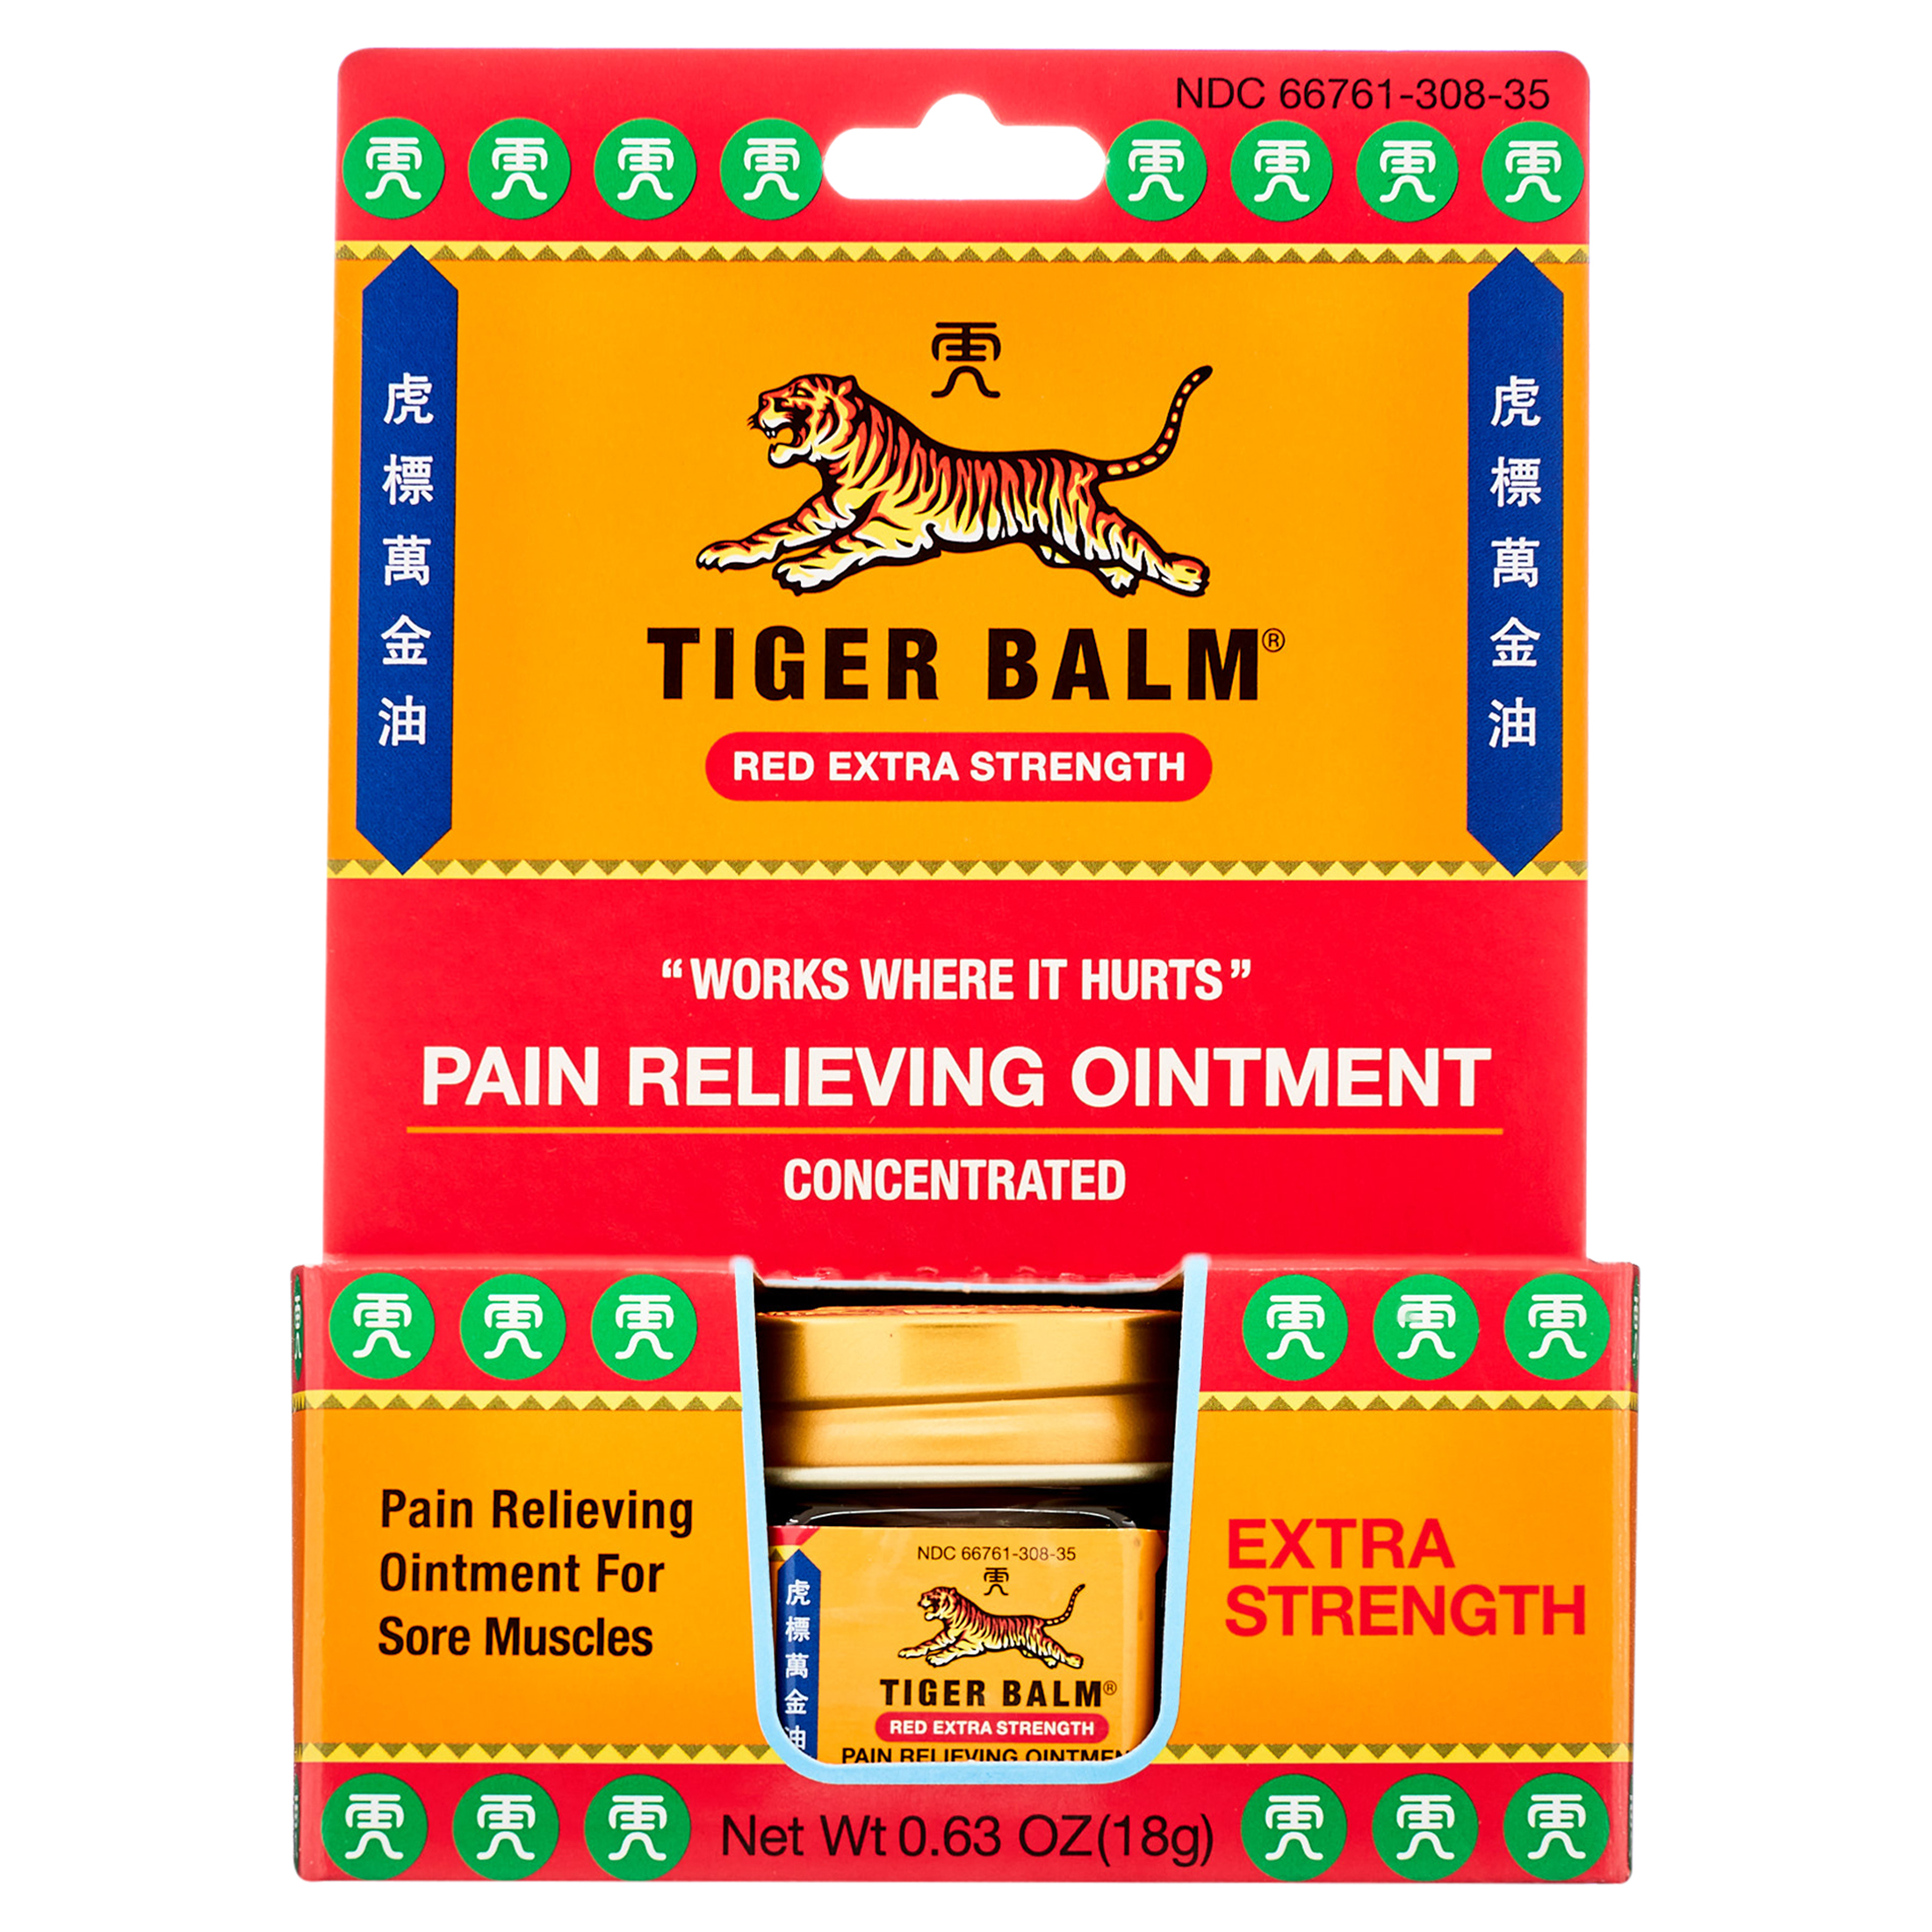 Tiger Balm Extra Strength Pain Relieving Ointment, 0.63 oz Jar for Arthritis Joint Pain Backaches Strains and Sore Muscles - image 1 of 9